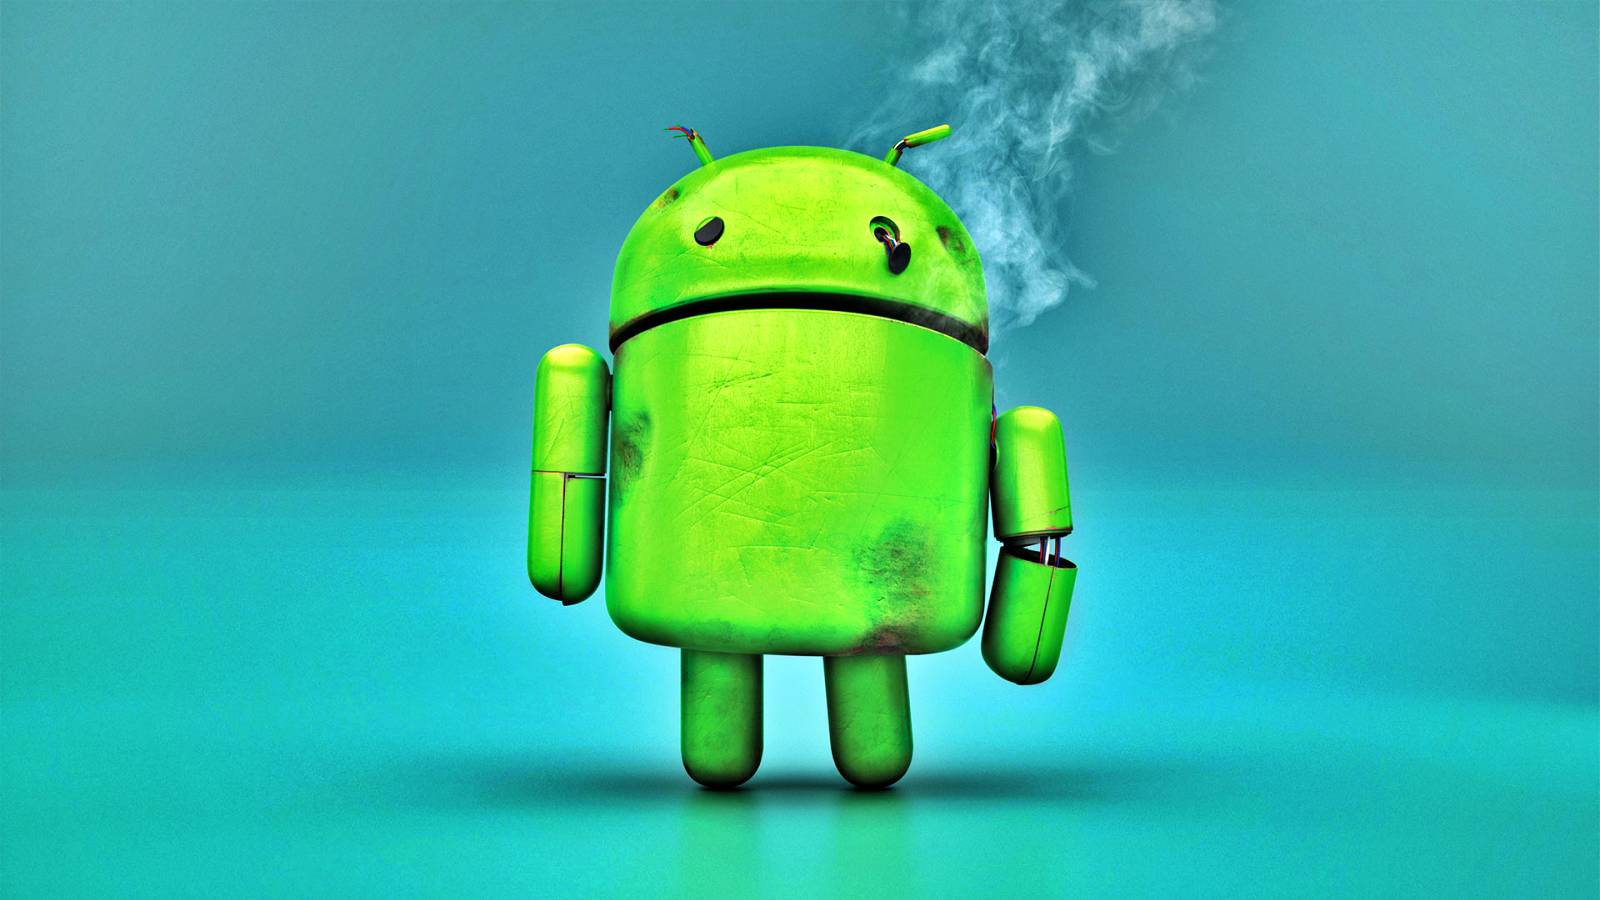 System Android